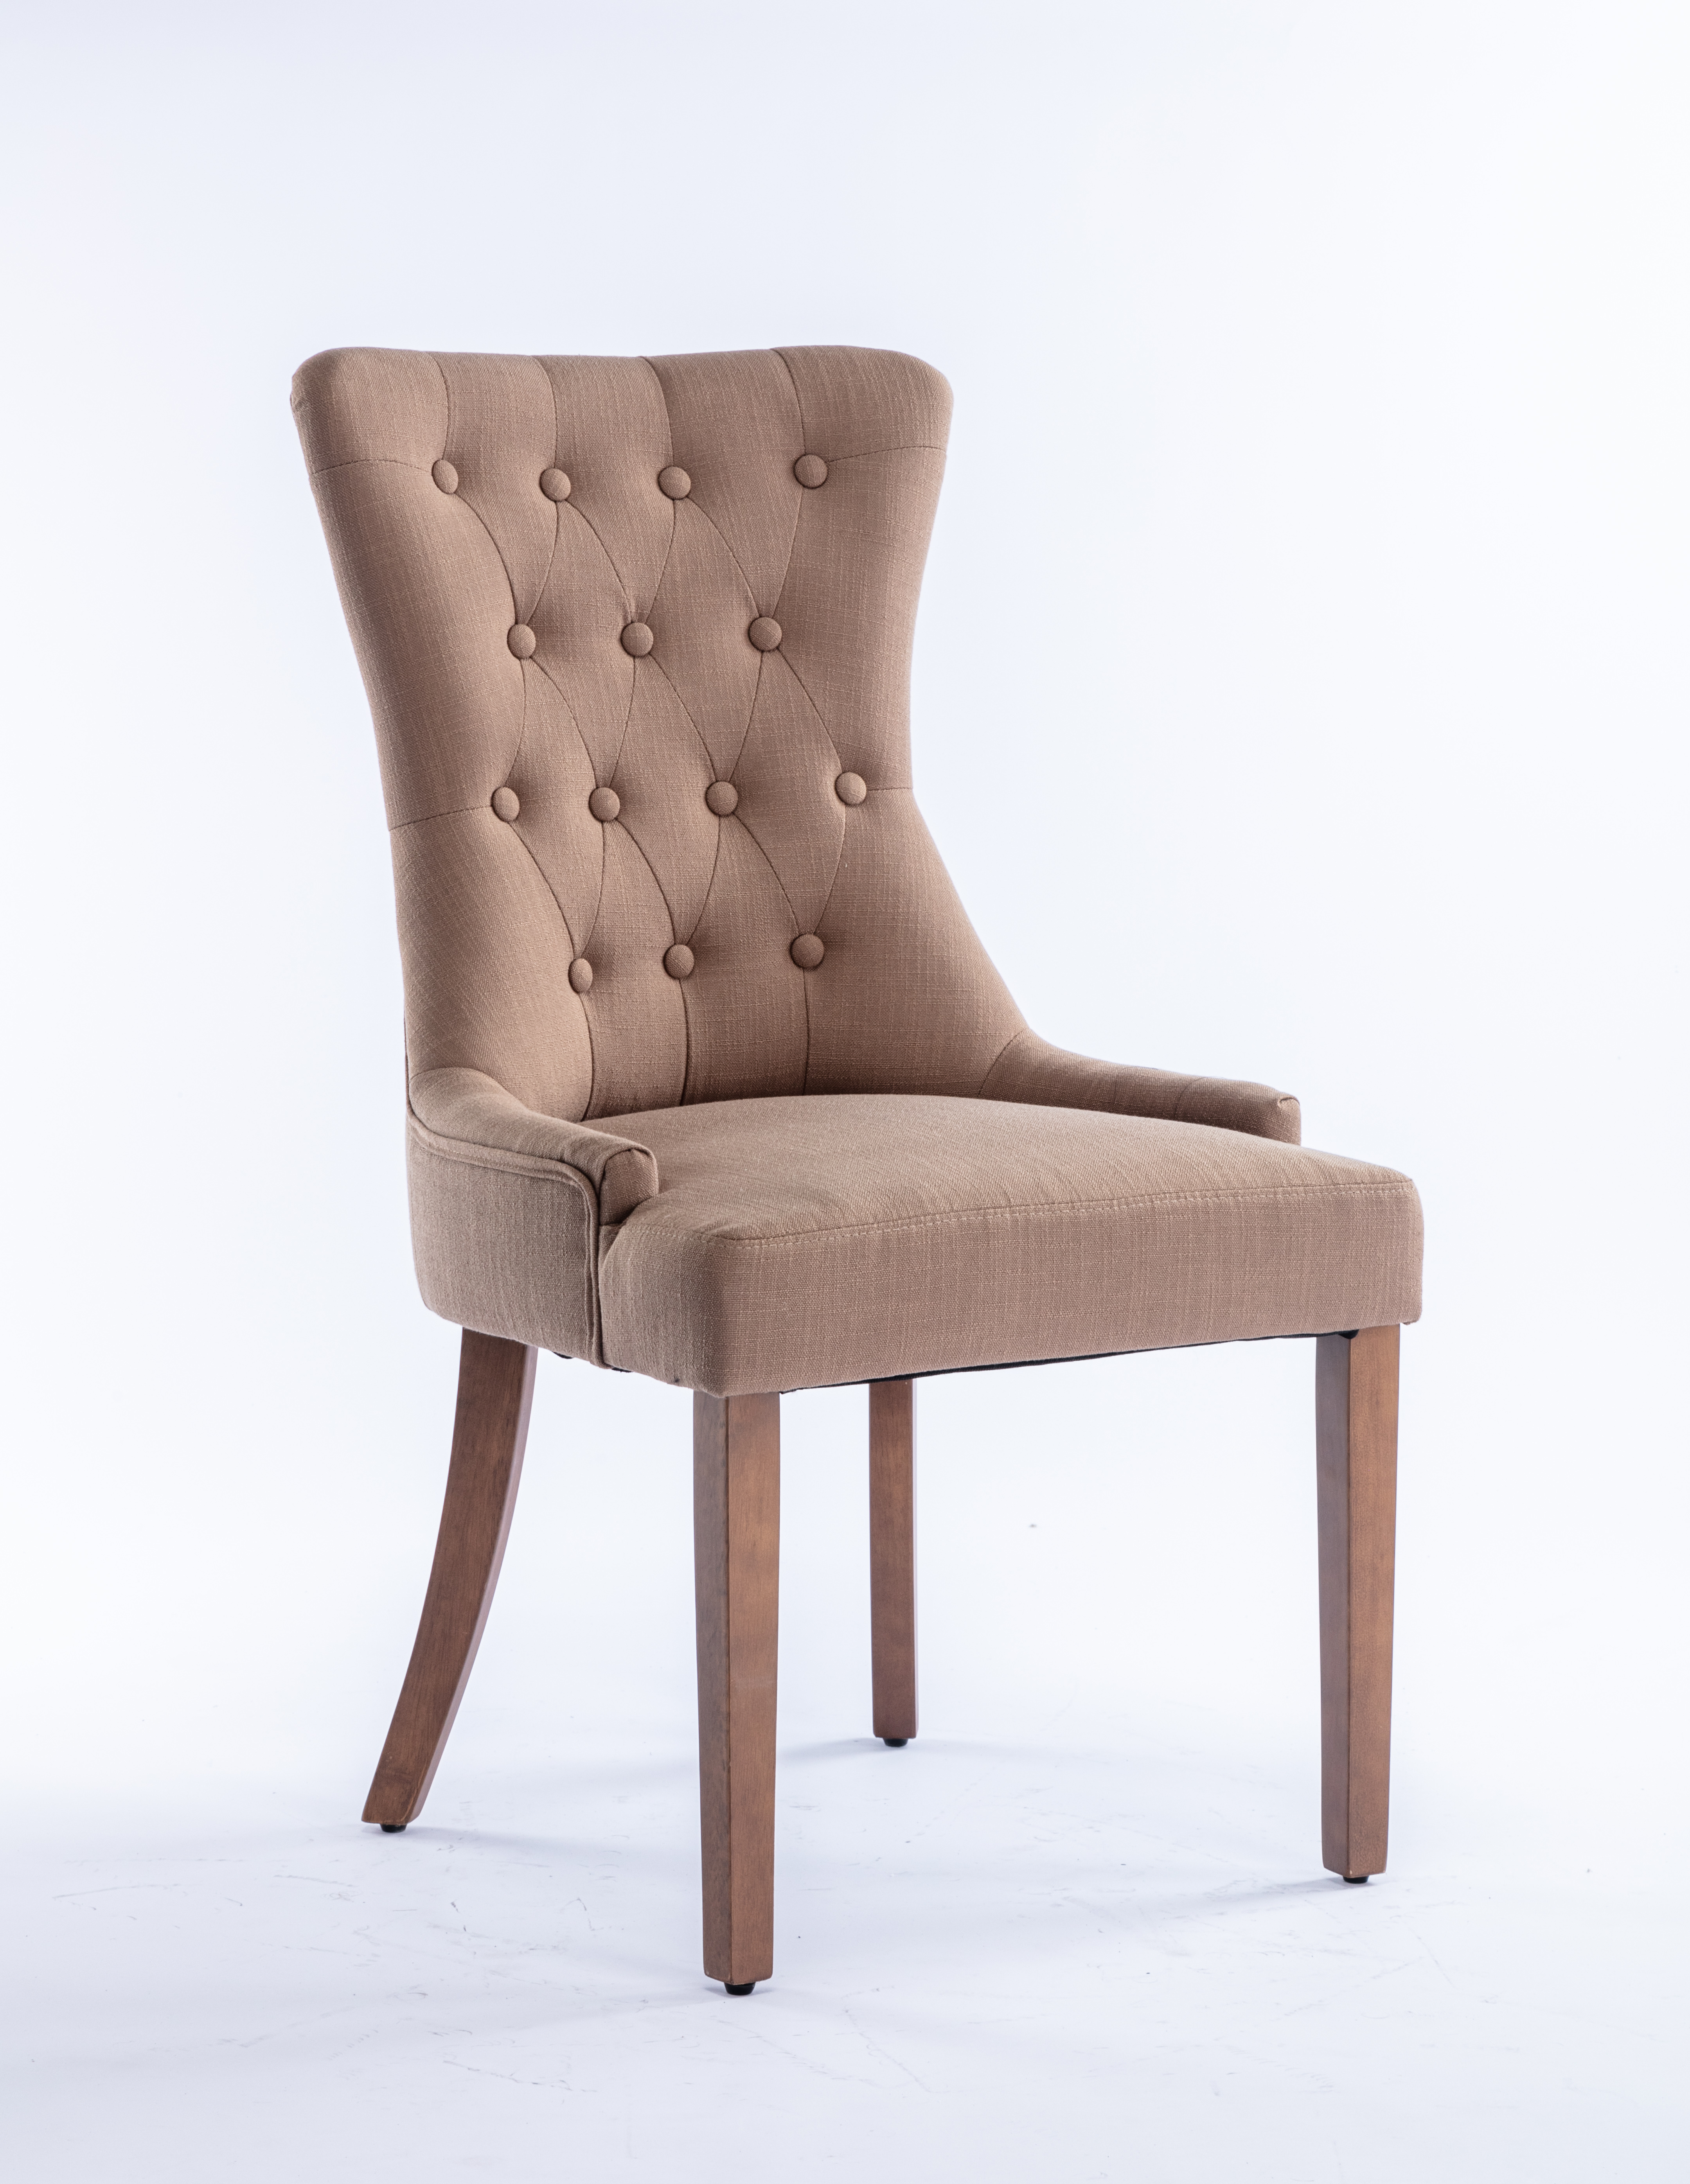 Classic Button Tufted Brown Linen Fabric Upholstered Dining Chair with Solid Wood Legs 2 PCS-Boyel Living